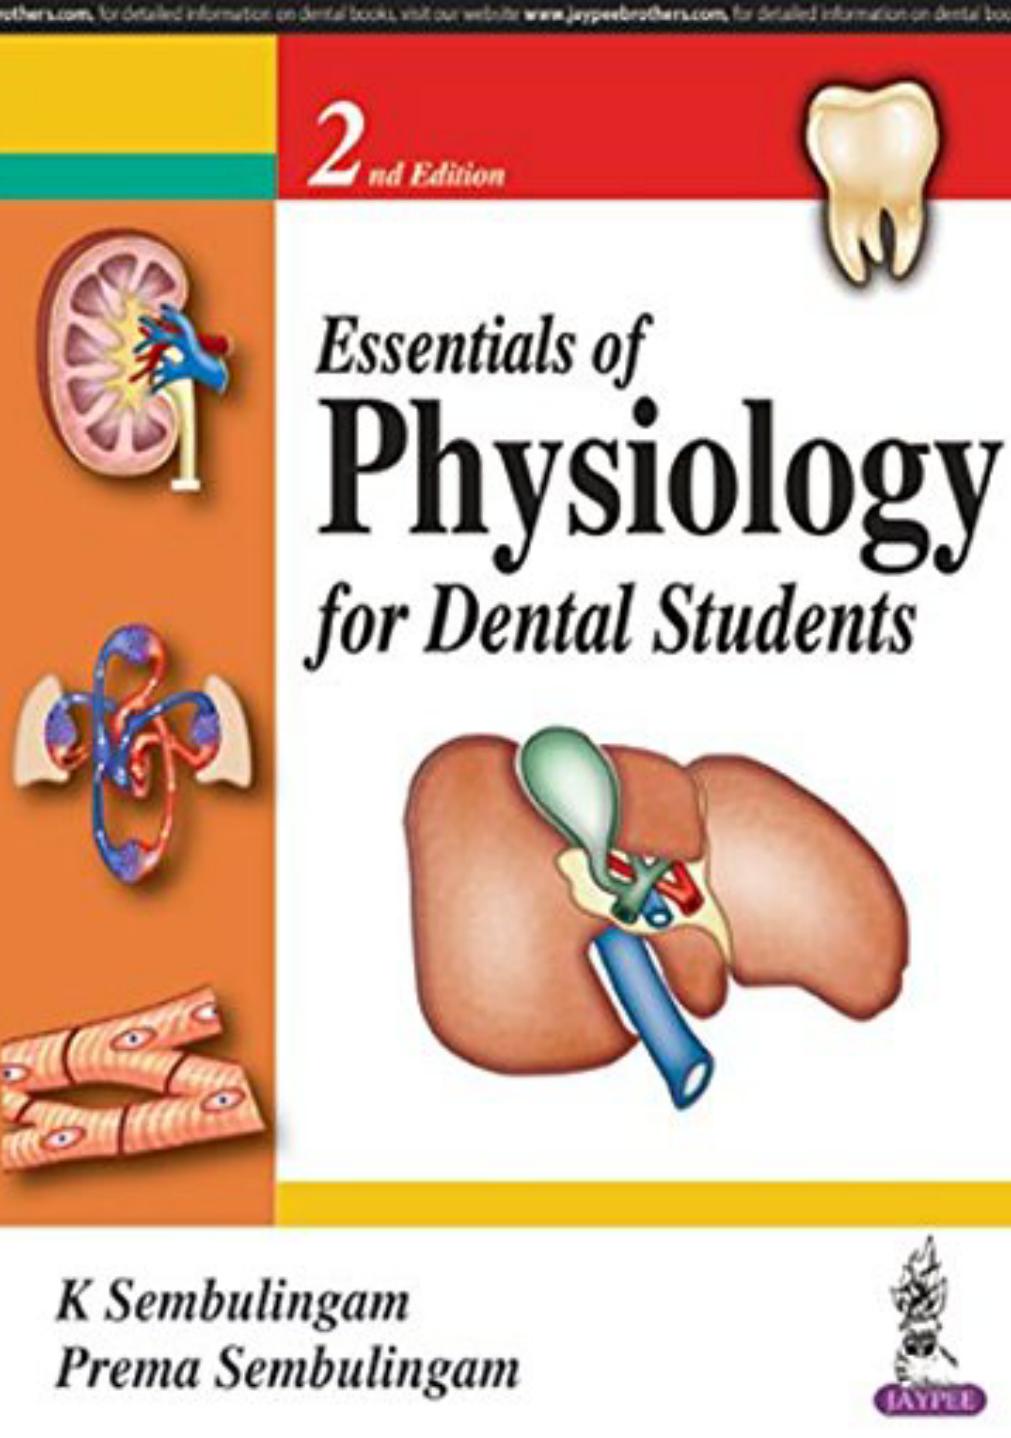 Essentials of Physiology for Dental Students ( PDFDrive )